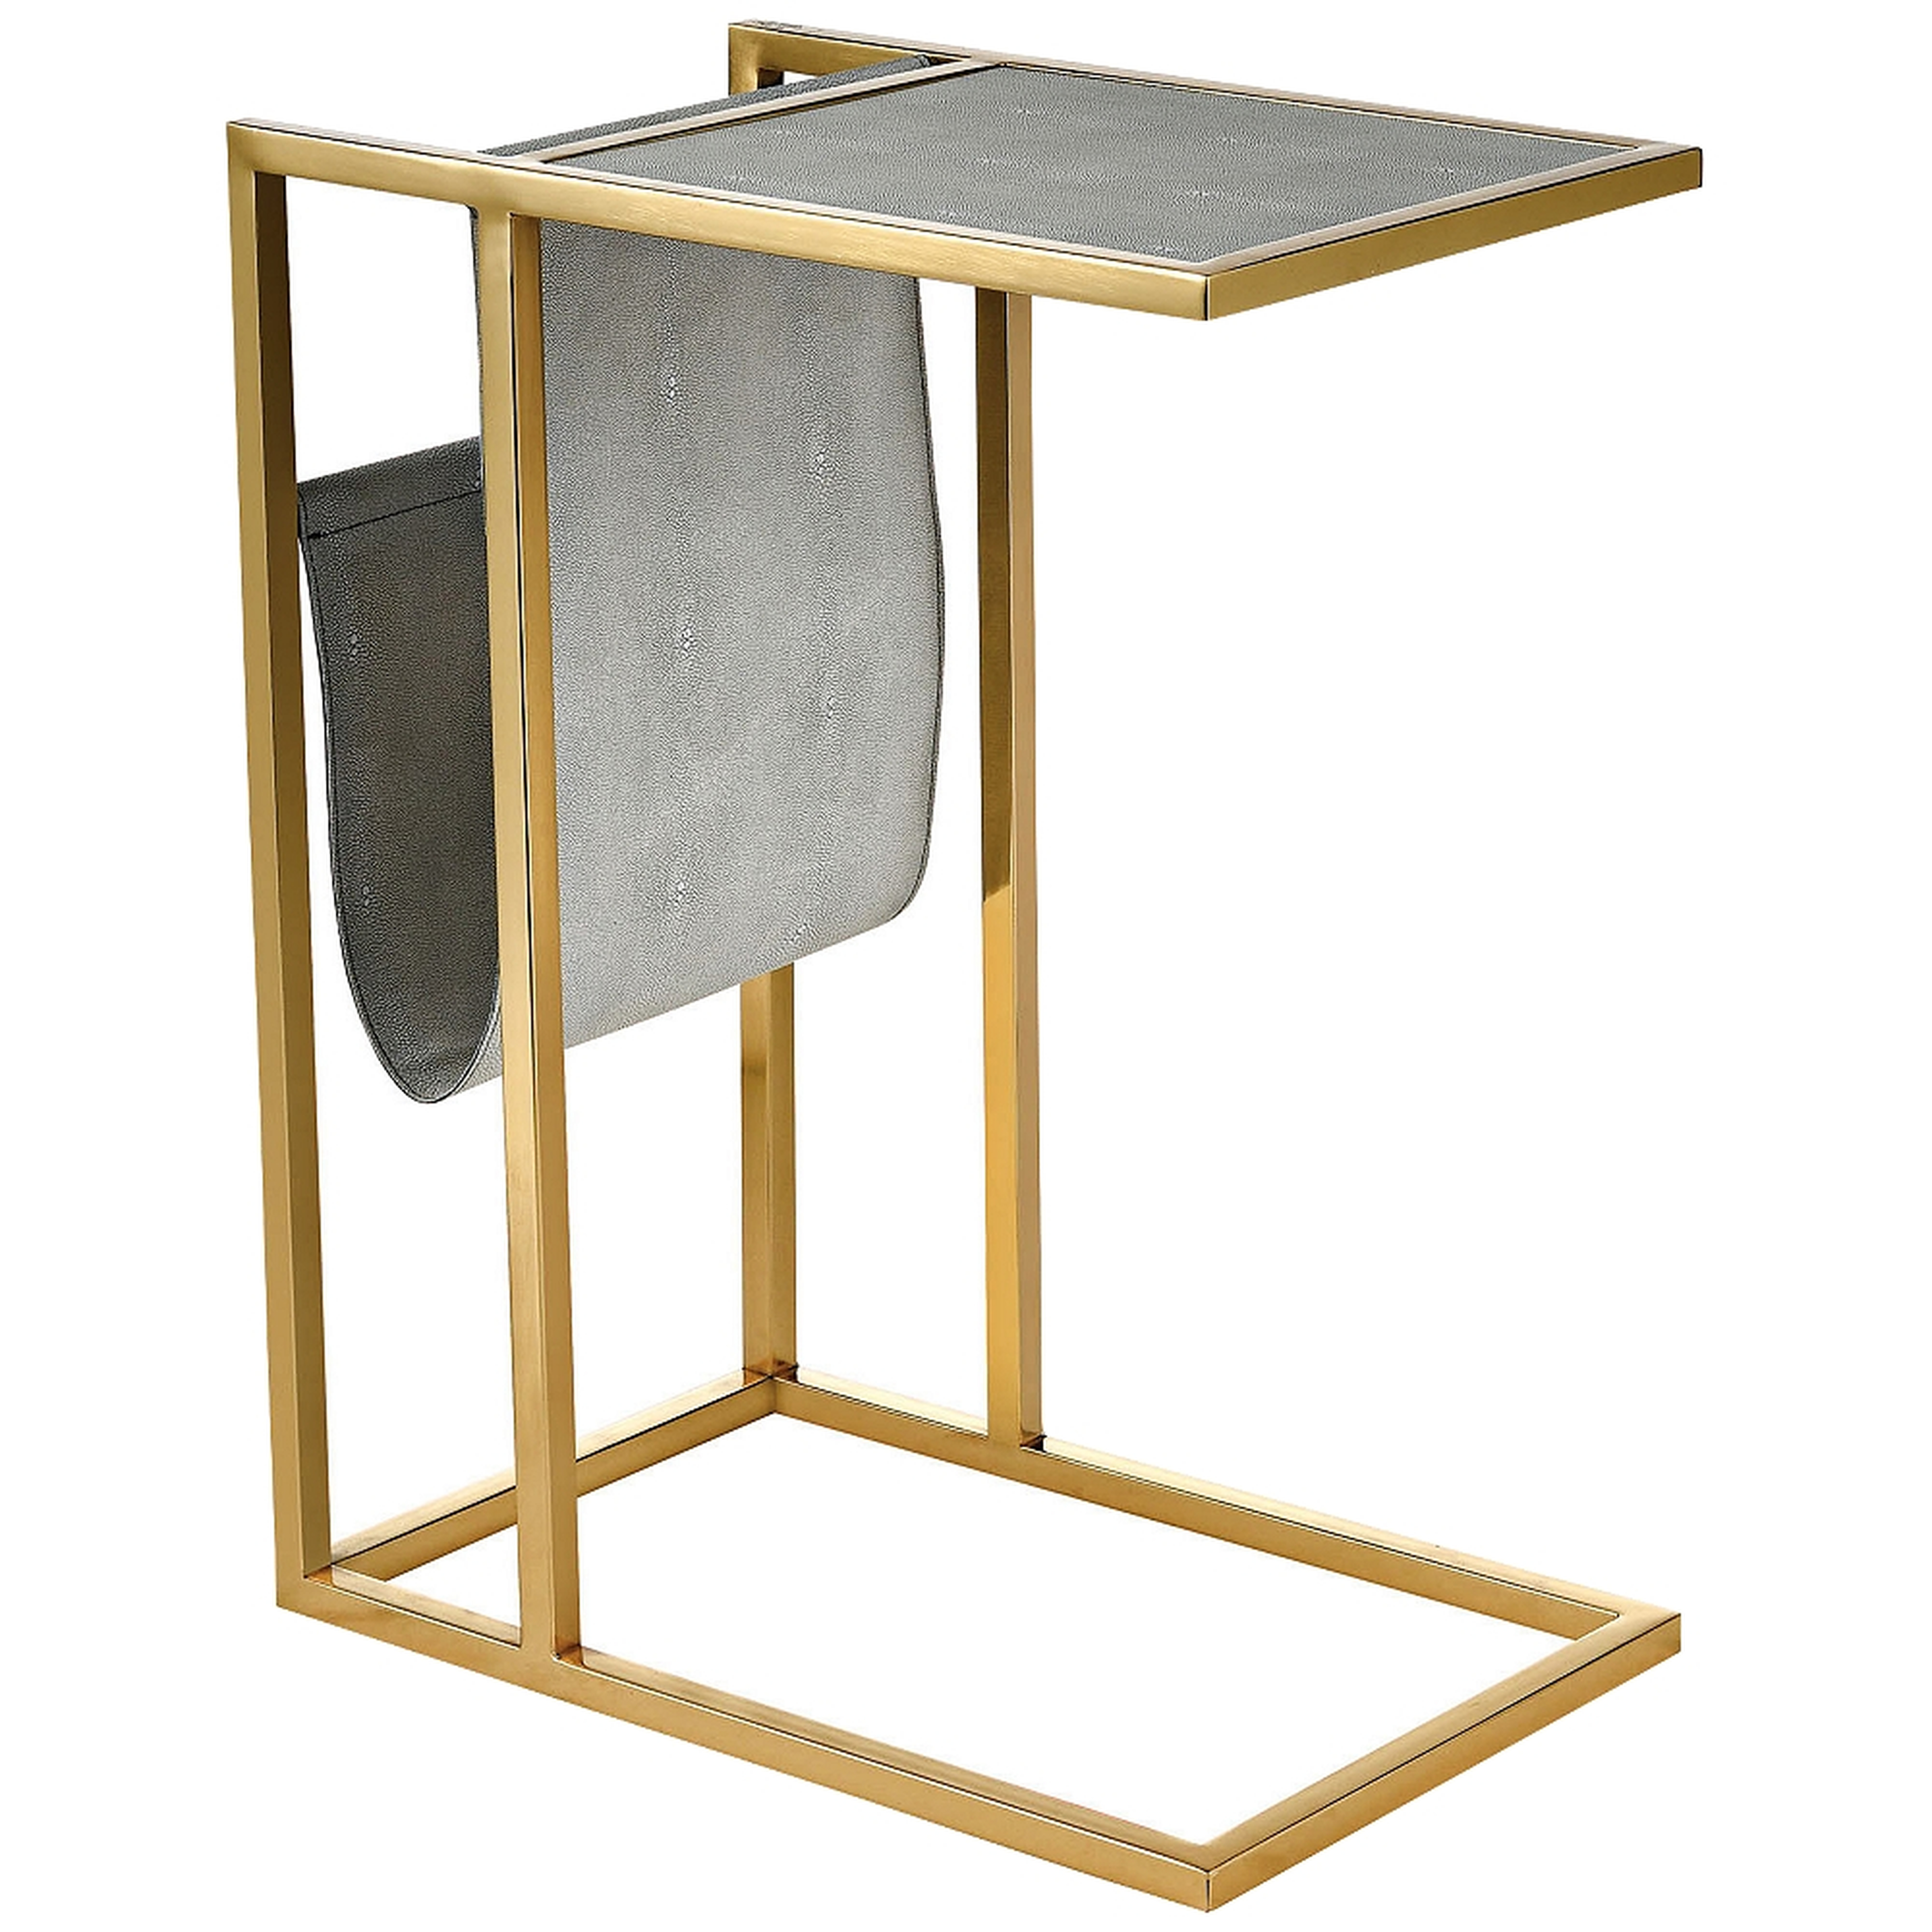 Kingsroad 19"W Gold and Gray Accent Table w/ Magazine Holder - Style # 86A94 - Lamps Plus